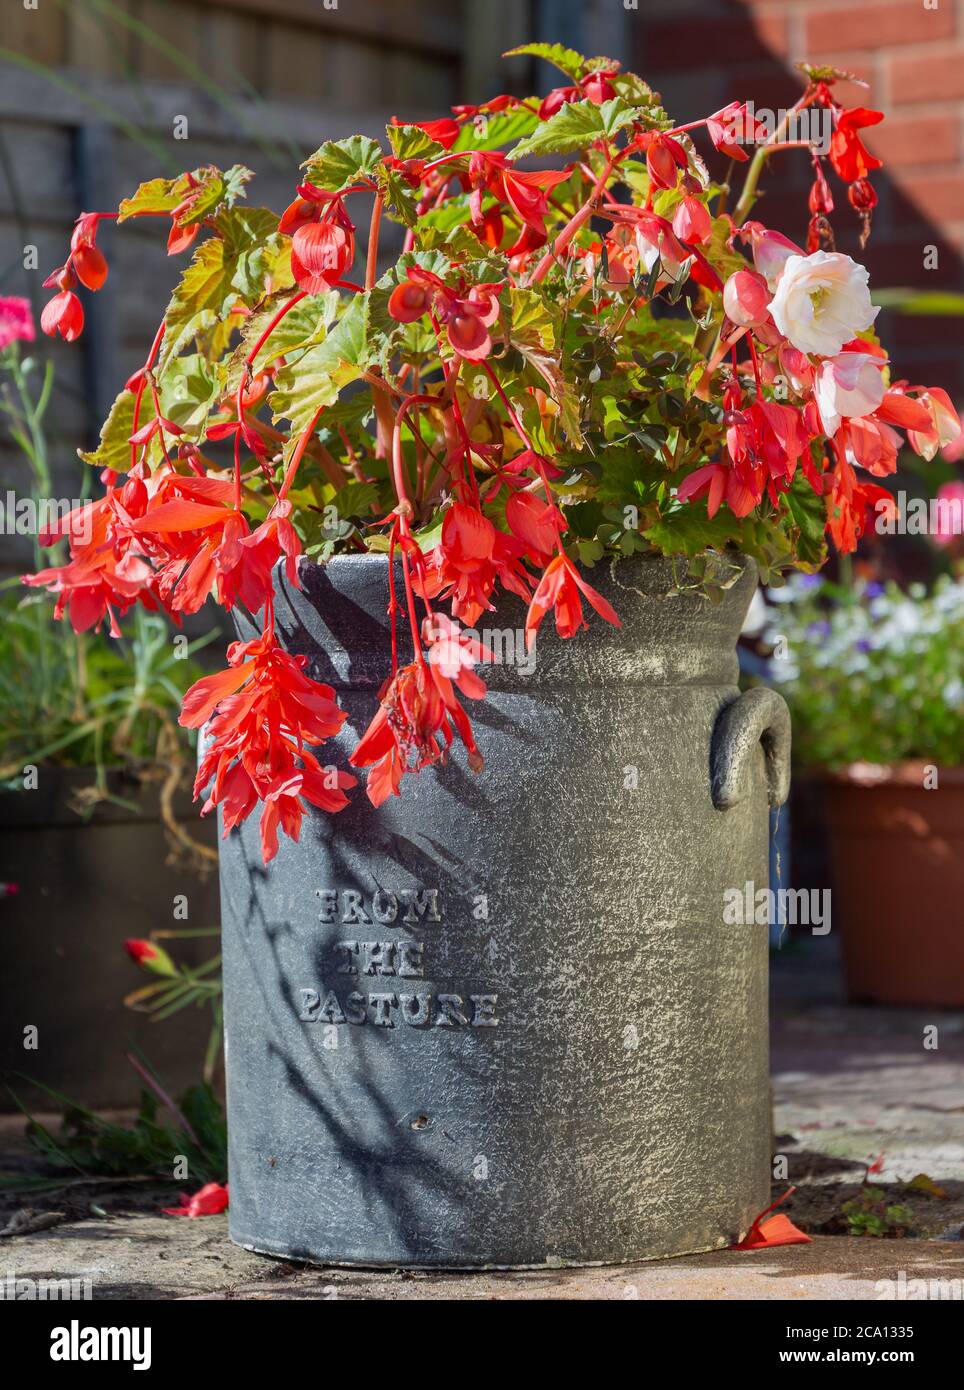 Begoniaceae, Begonia flowers spilling out over churn design plant pot Stock Photo